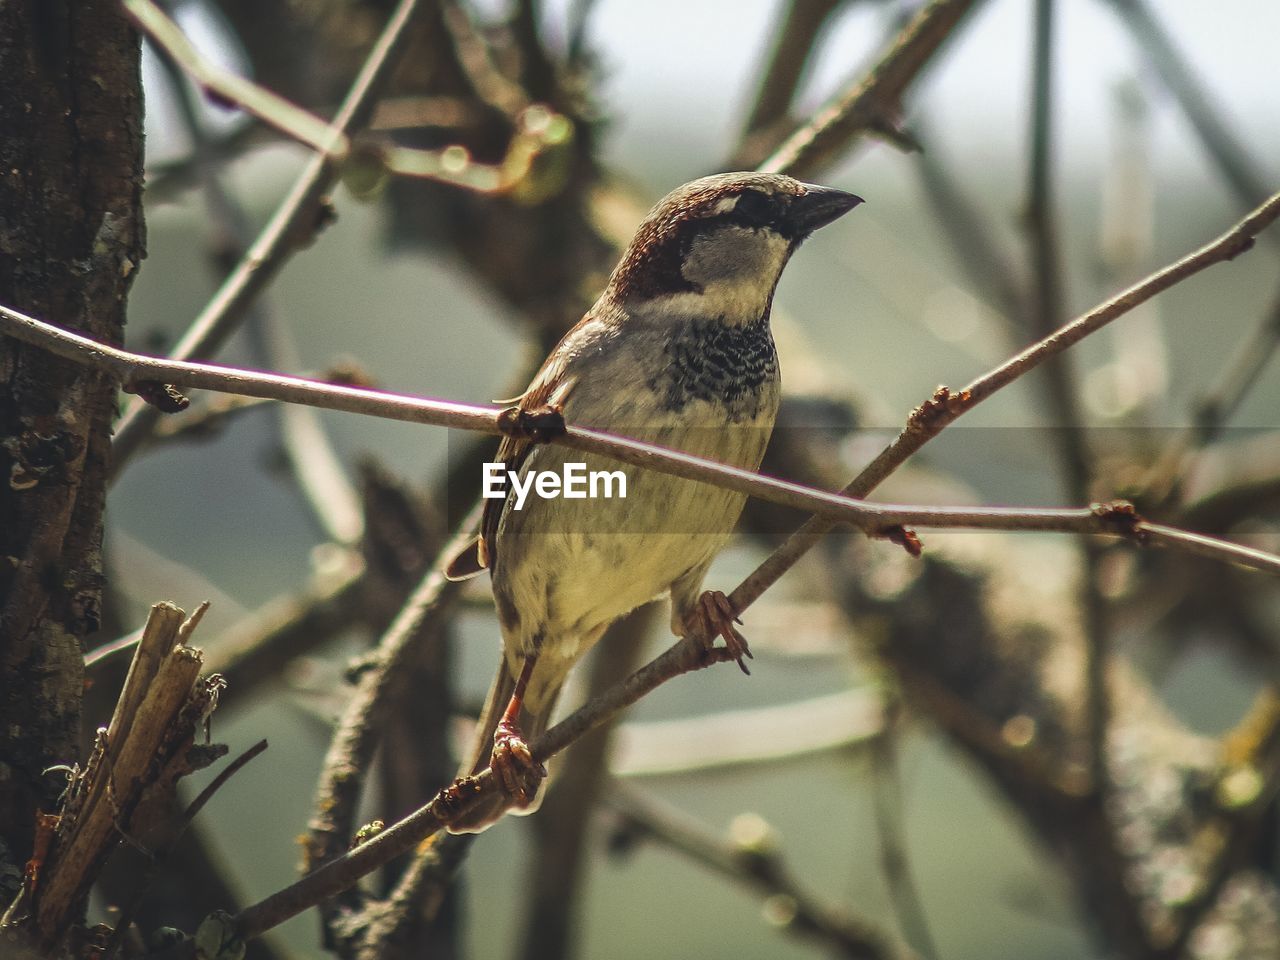 animal themes, animal, animal wildlife, bird, wildlife, tree, nature, branch, one animal, perching, plant, beak, no people, focus on foreground, outdoors, twig, beauty in nature, close-up, day